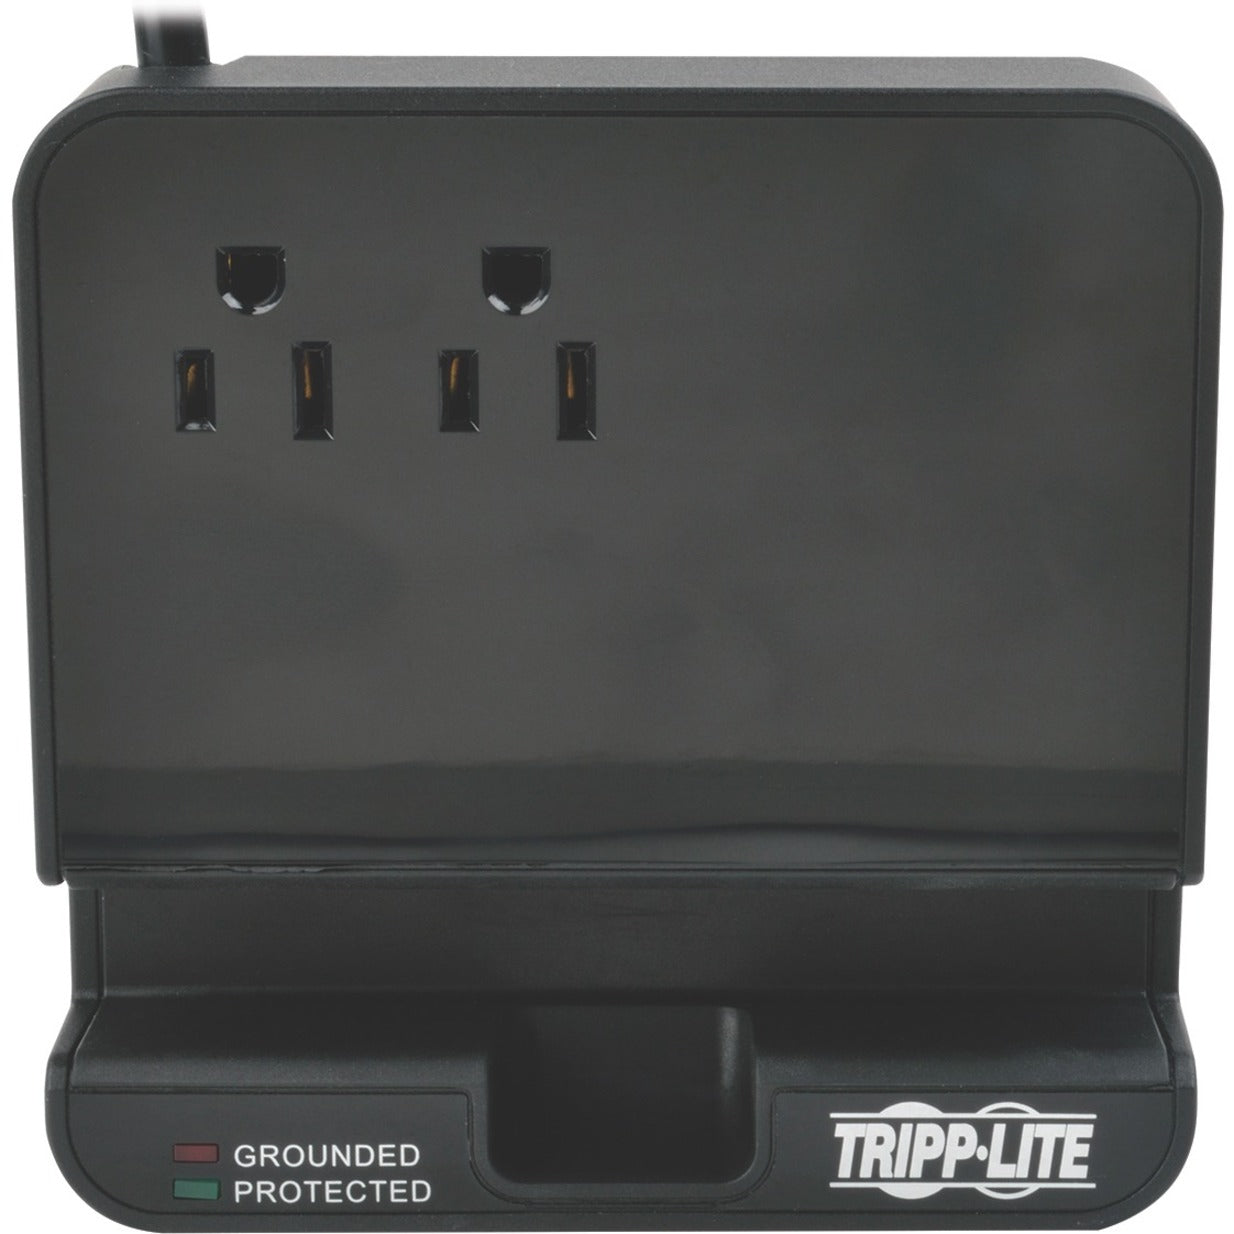 Tripp Lite 4-Port USB Charging Station Surge Protector 6 Outlet 6' Cord (TLP26USBB) Top image